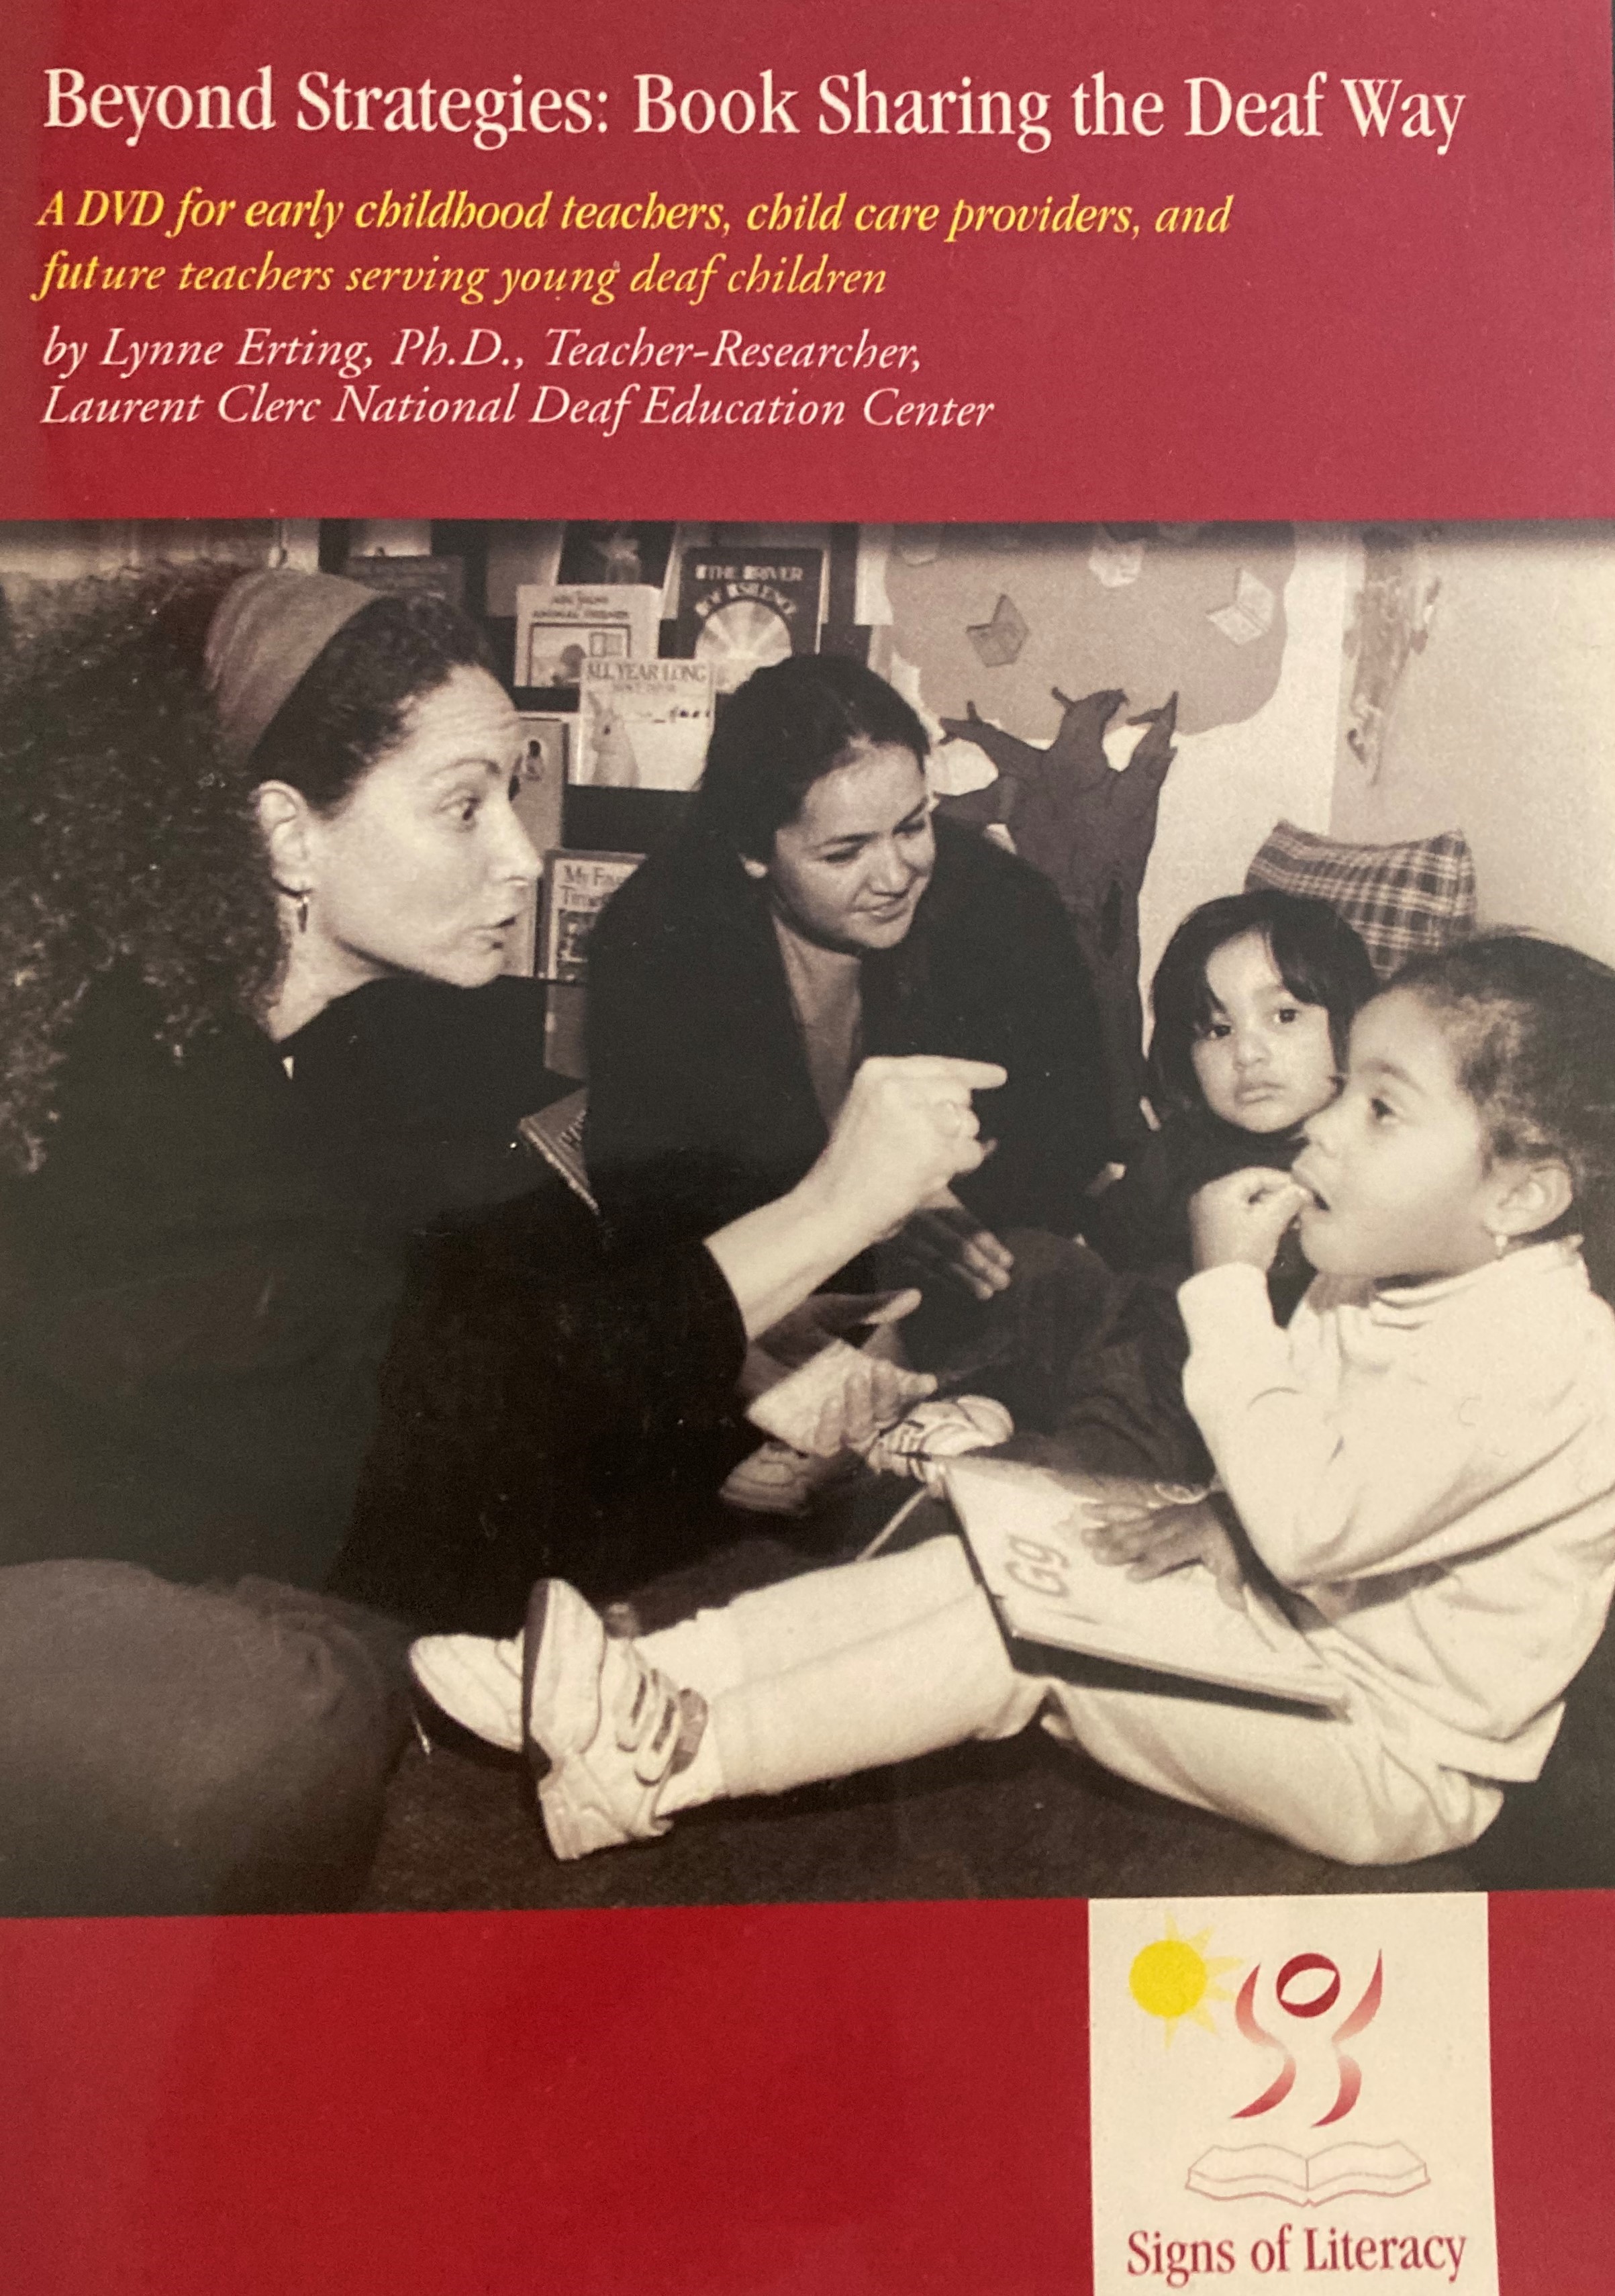 A DVD case with a red background and the title "Beyond Stargies: Book Sharing the Deaf Way" at the top. Below a text in yellos describes "A DVD for early childhood teachers, child care providers, and future reachers erving young deaf children." Two adult females look at two young girls. One girl has an alphabet book open on her lap to the letter G and one adult is showing the girl the sign for g with her right hand.